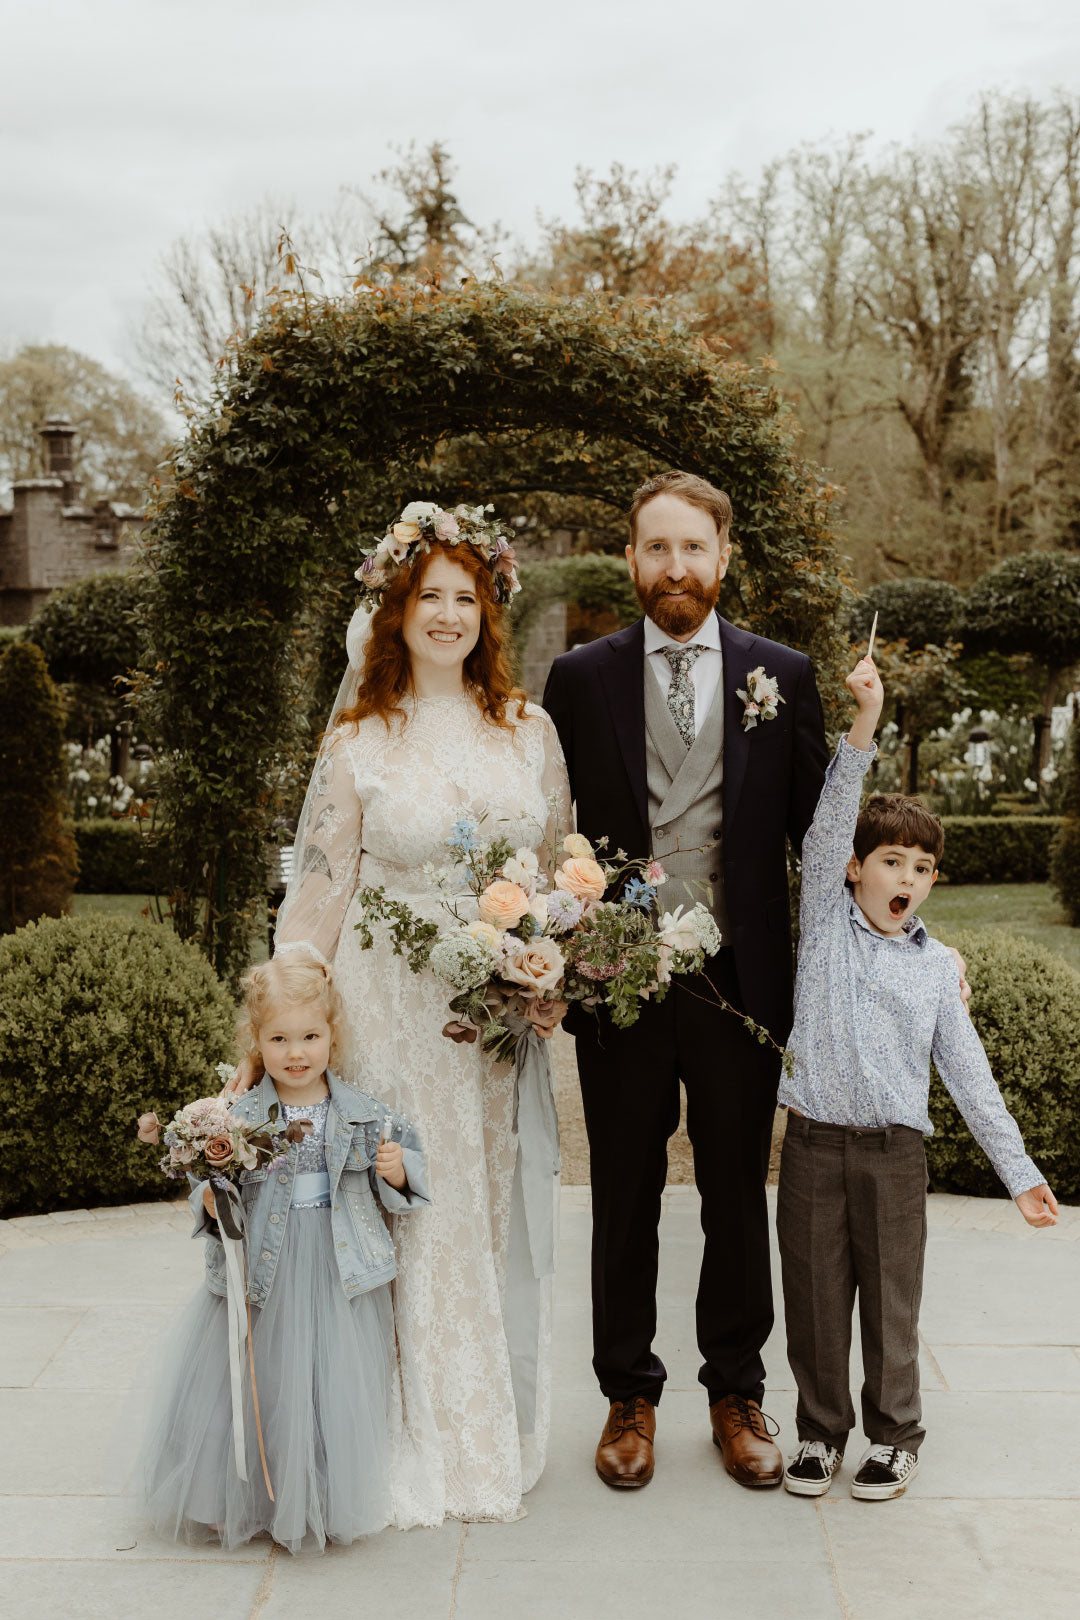 Bride and Groom with flower girl and ring bearer